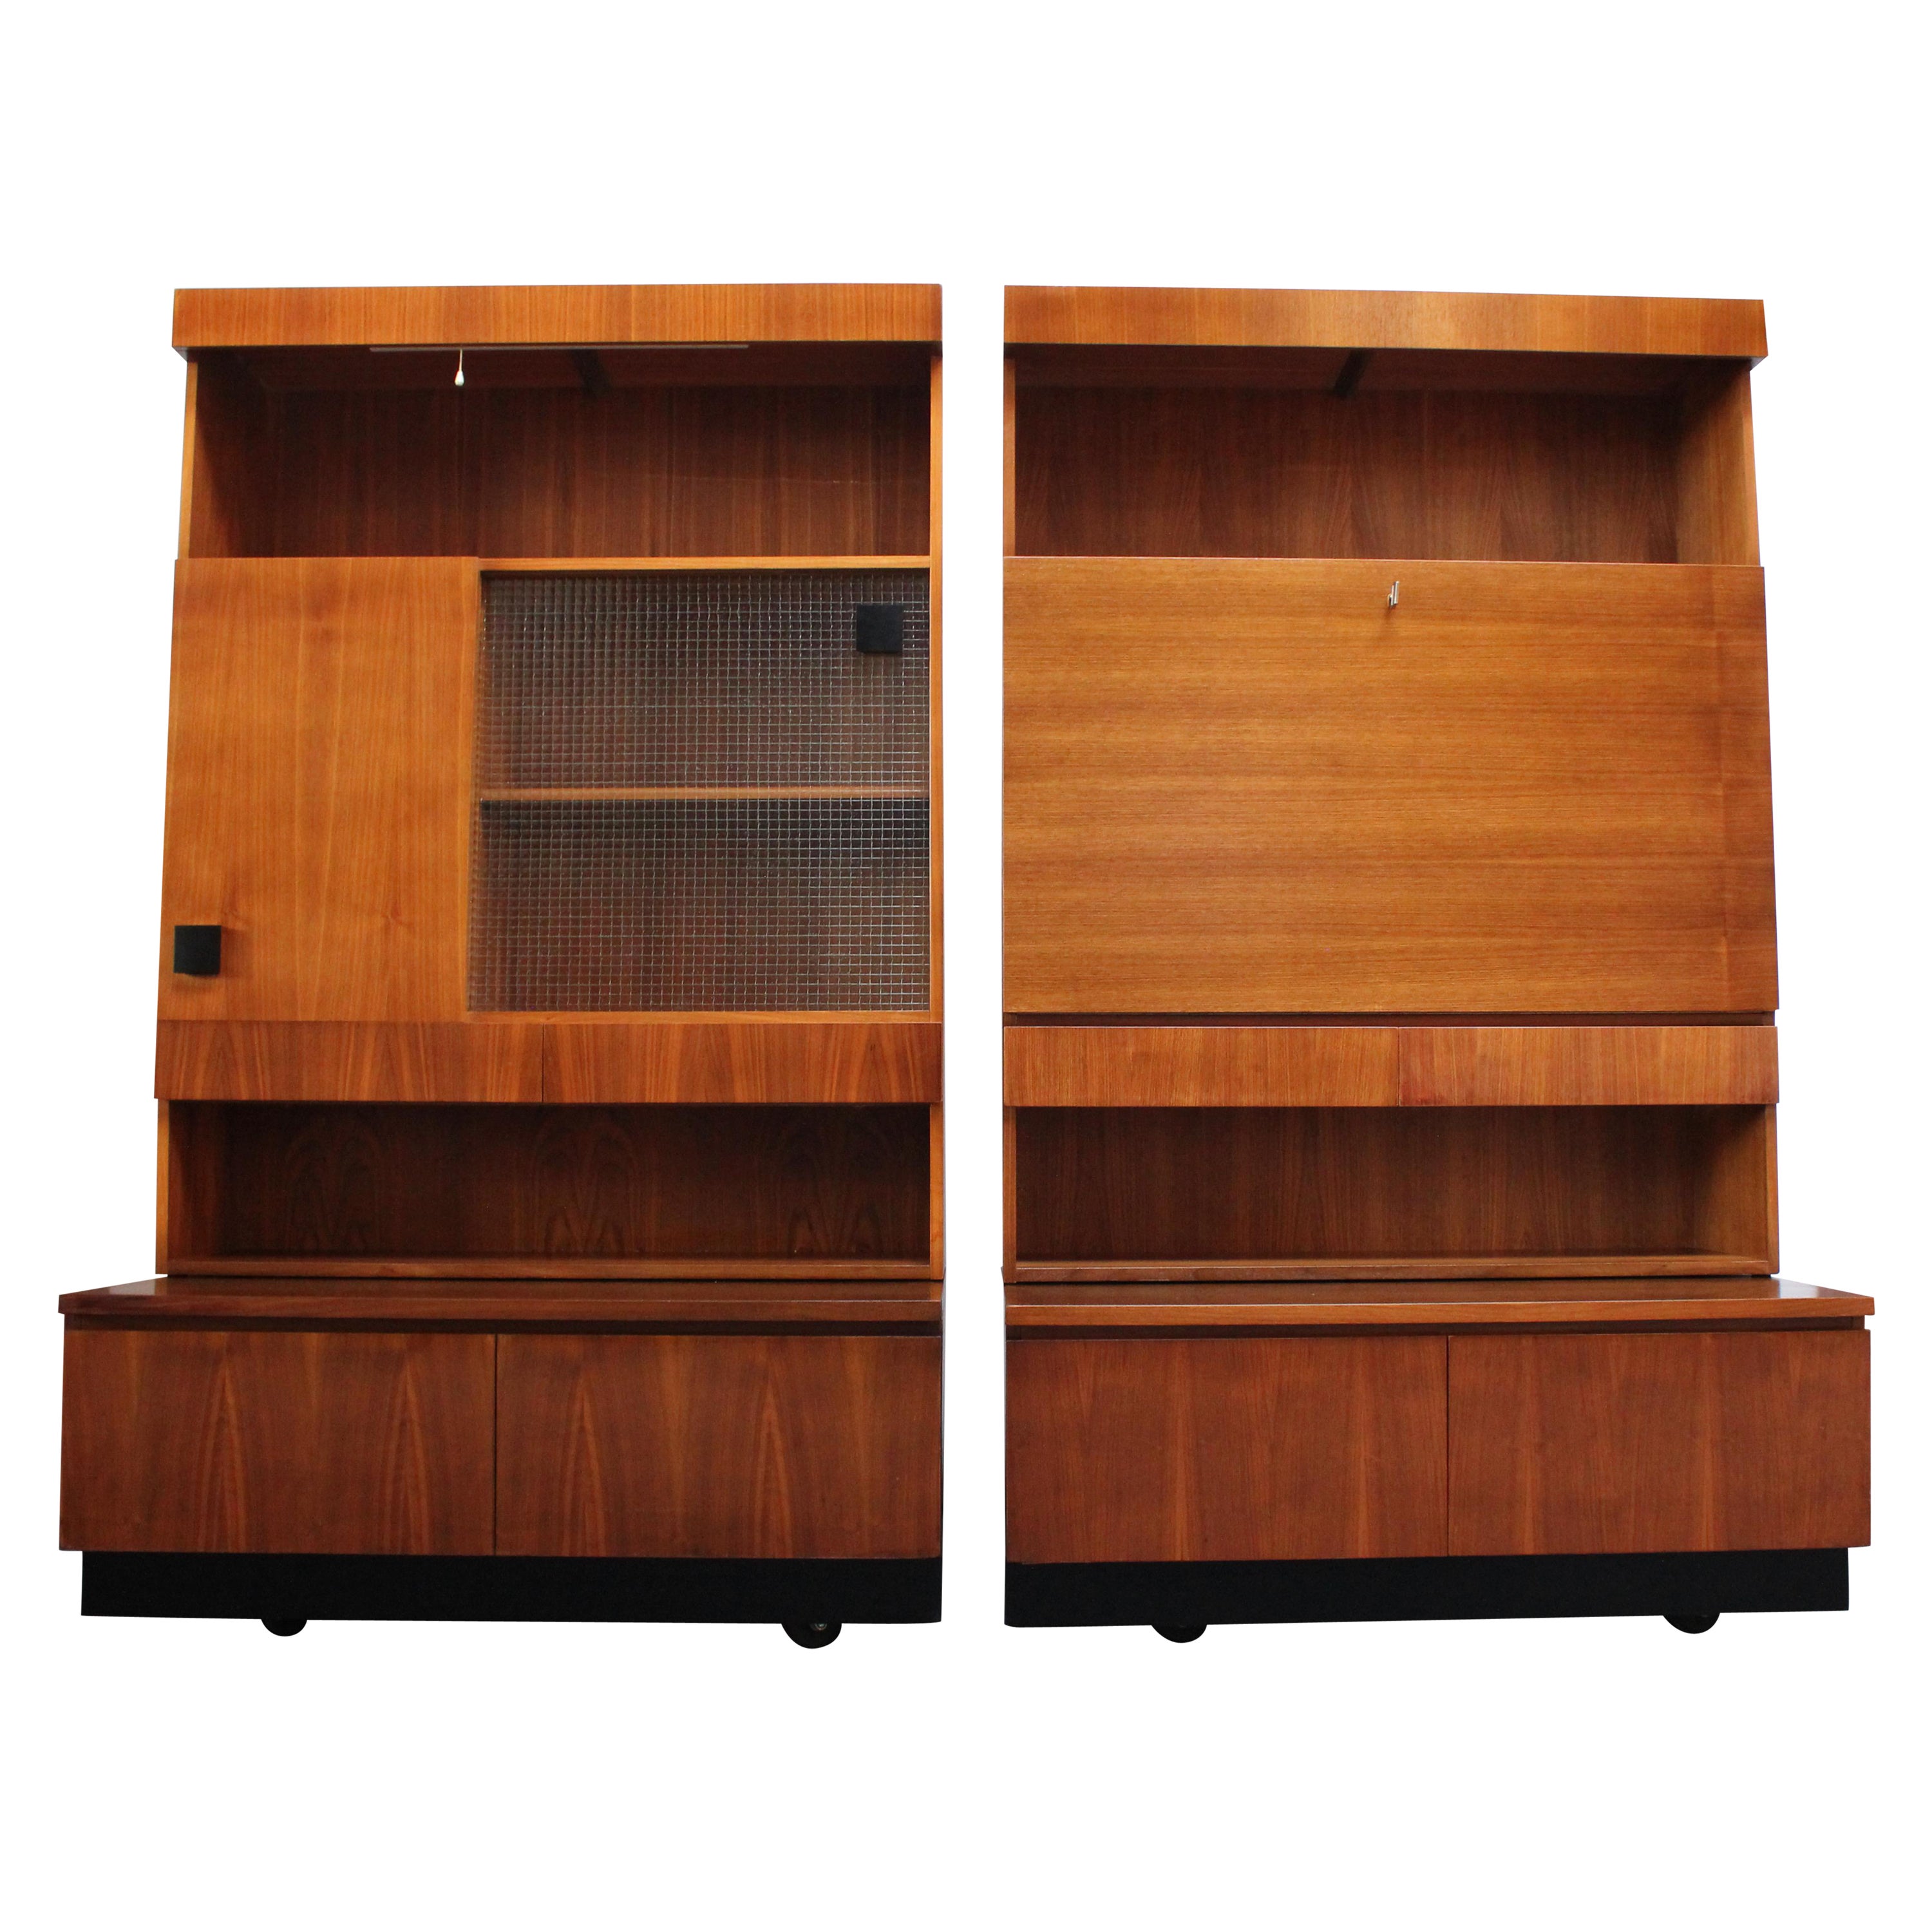 Pair of Italian Free-Standing Wall Units in Walnut on Ebonized Plinth Bases For Sale